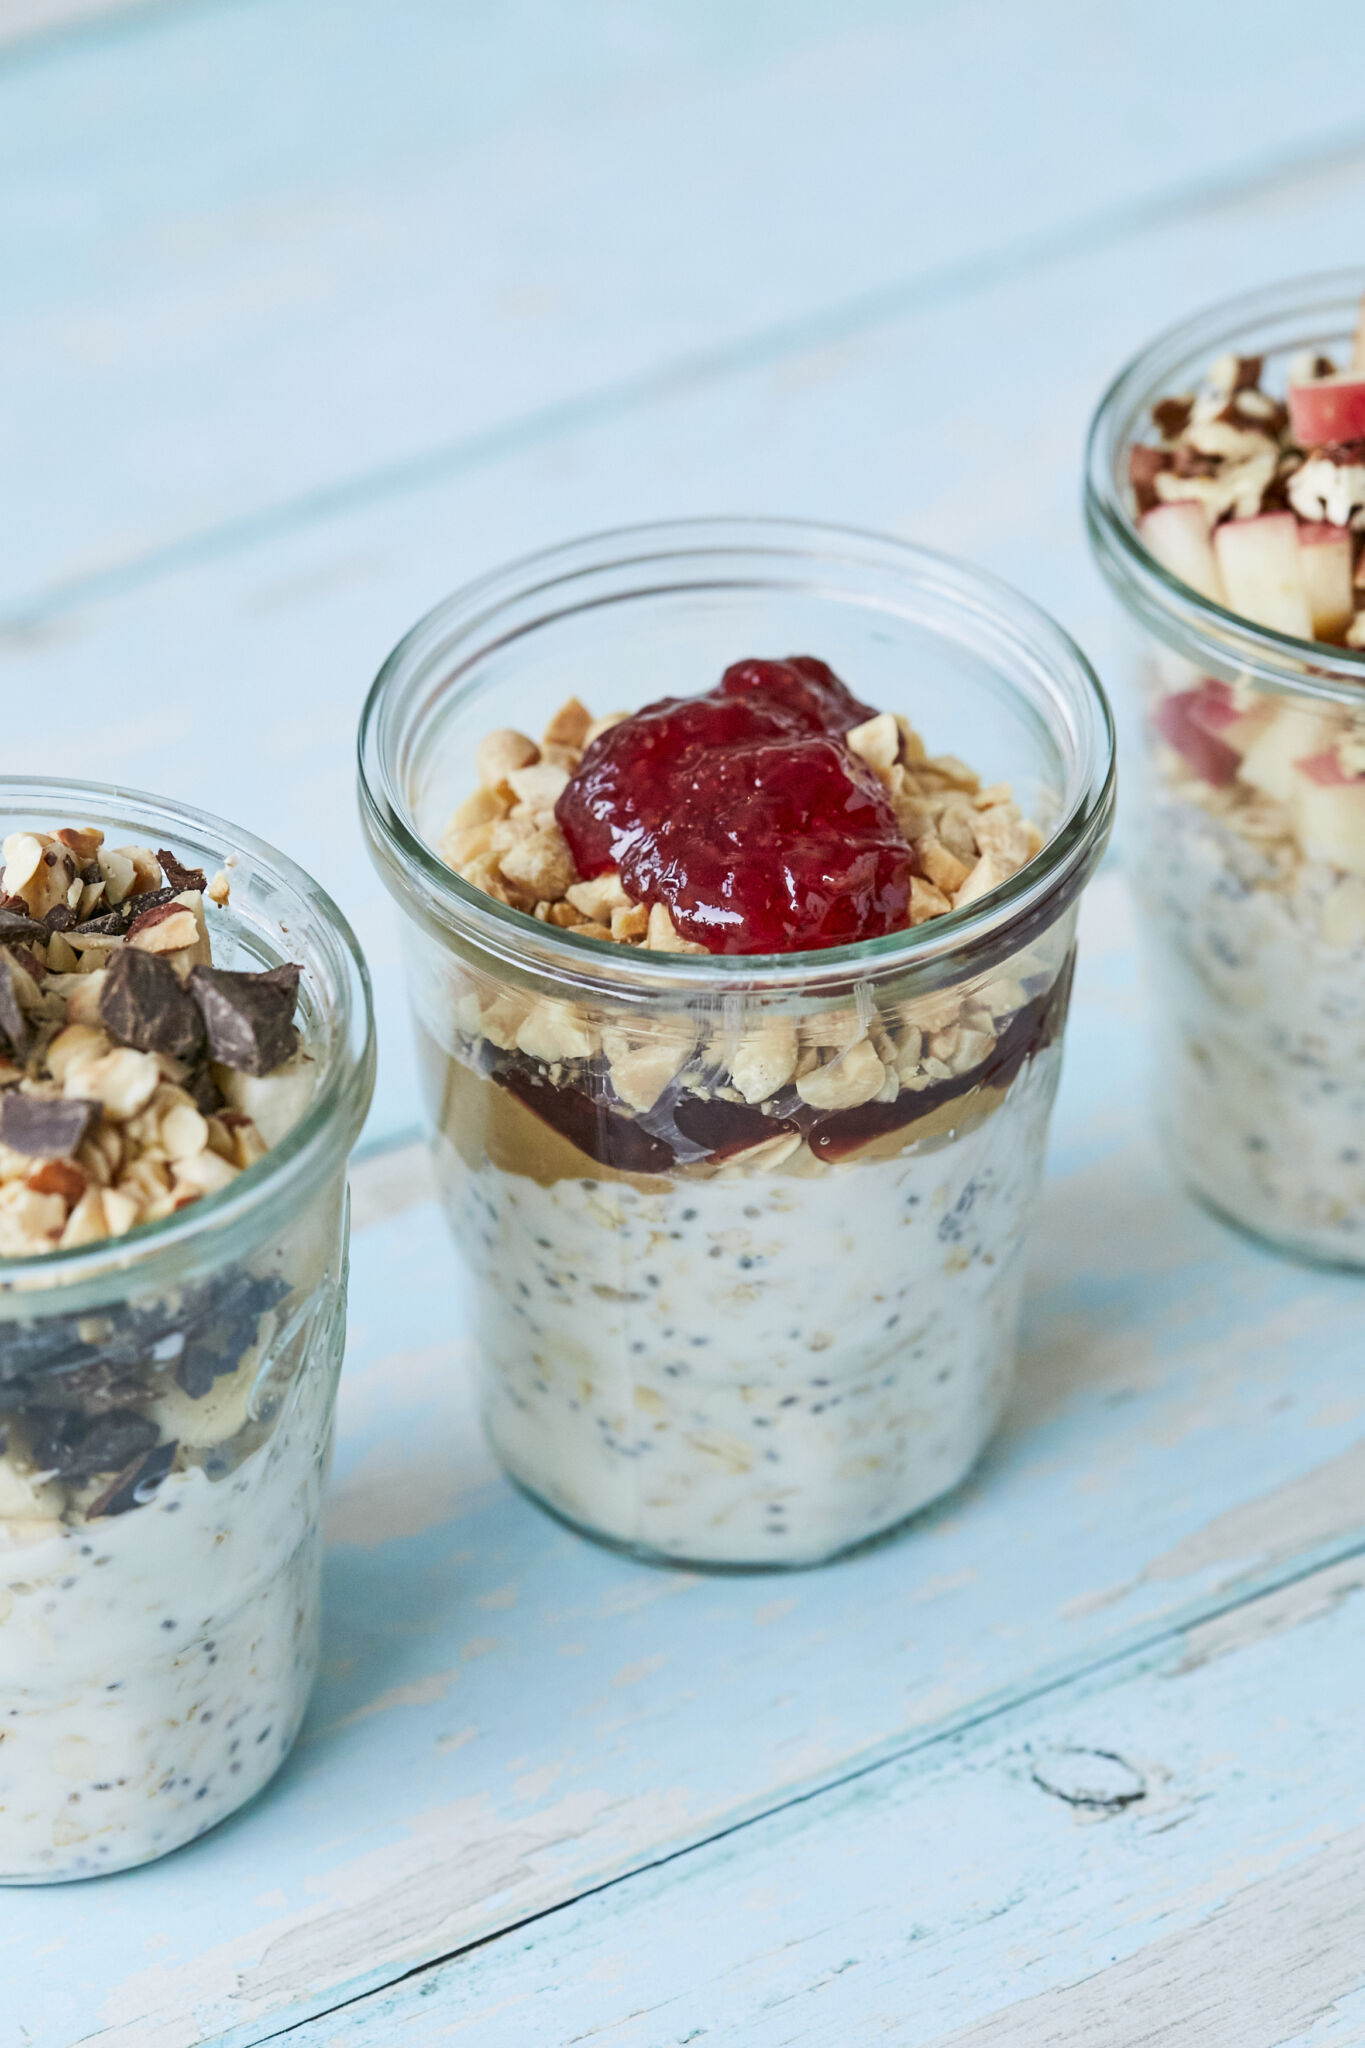 An additional sideview of the 3 jars of Overnight Oats so you can see the layers of ingredients in glass jars on a blue wooden table.